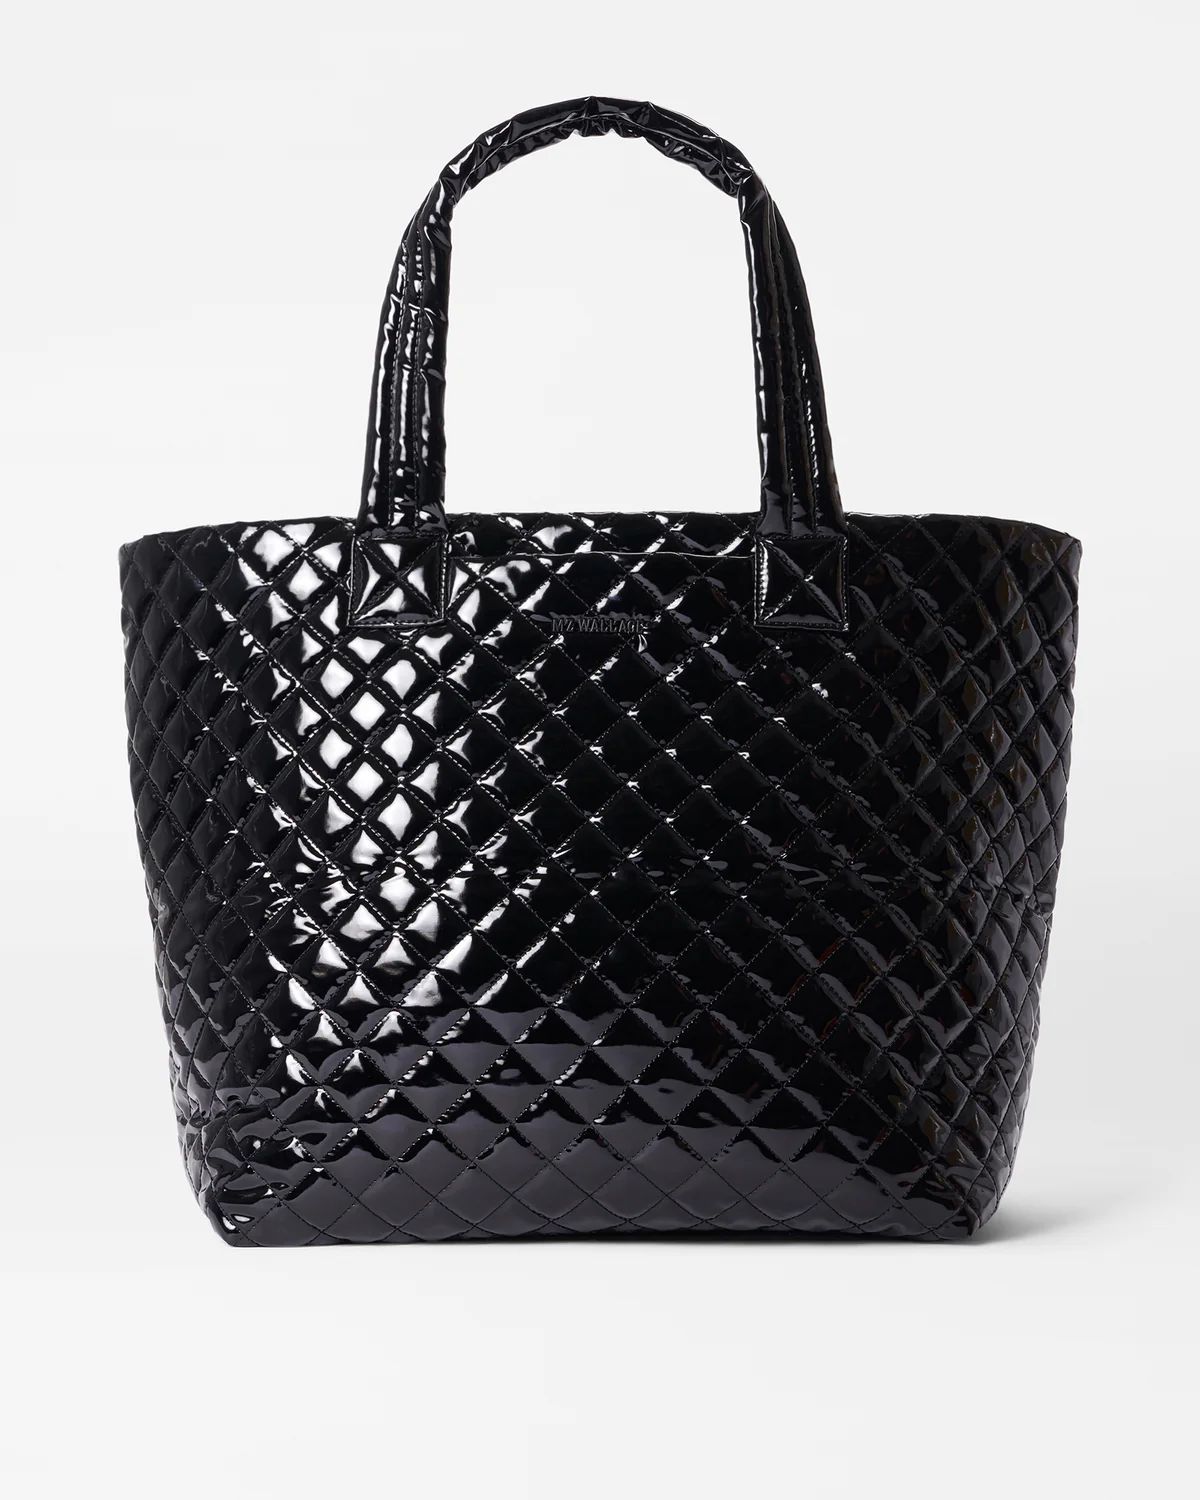 MZ Wallace Black Lacquer Large Metro Tote Deluxe | MZ Wallace